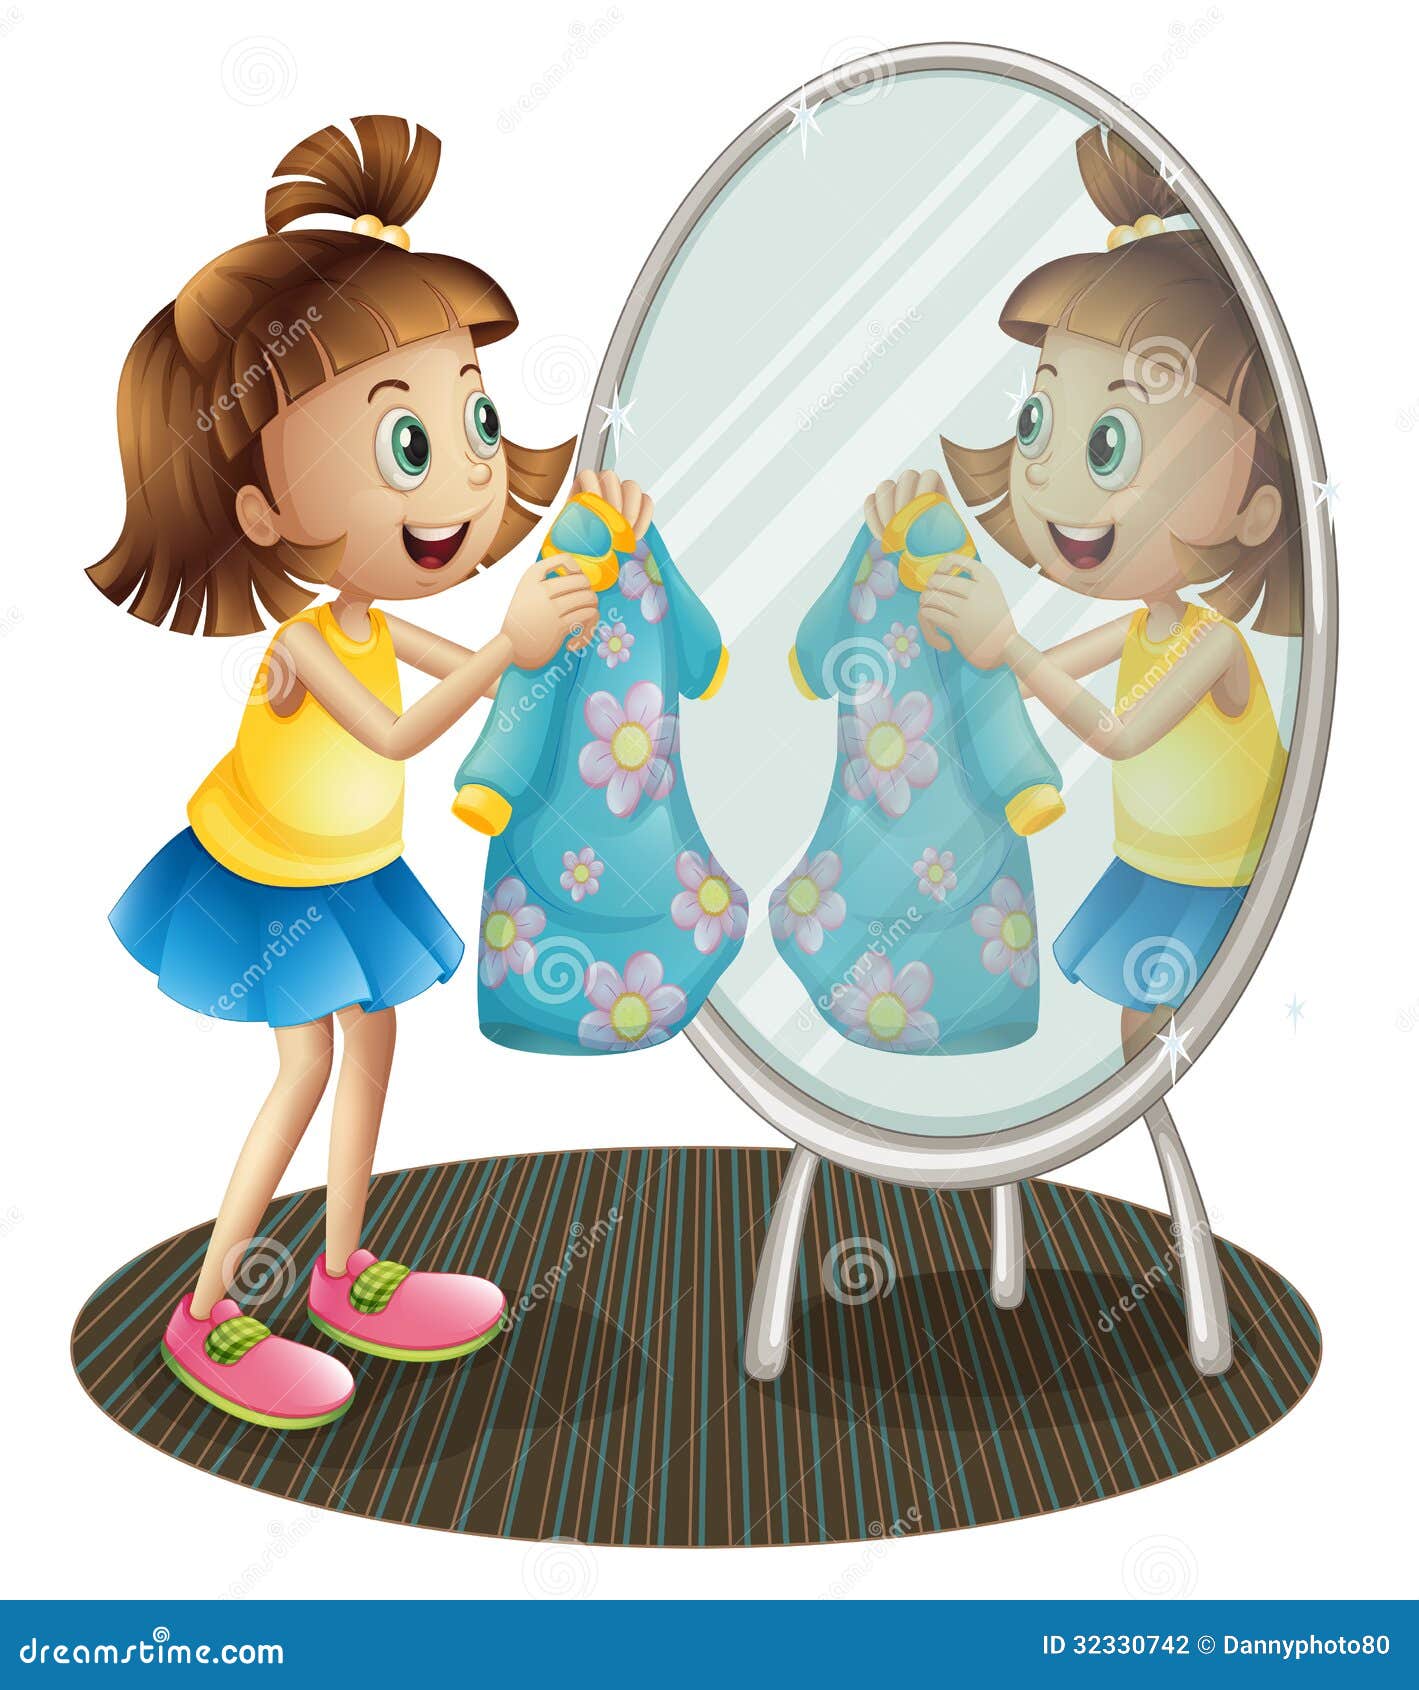 clipart girl getting dressed - photo #29